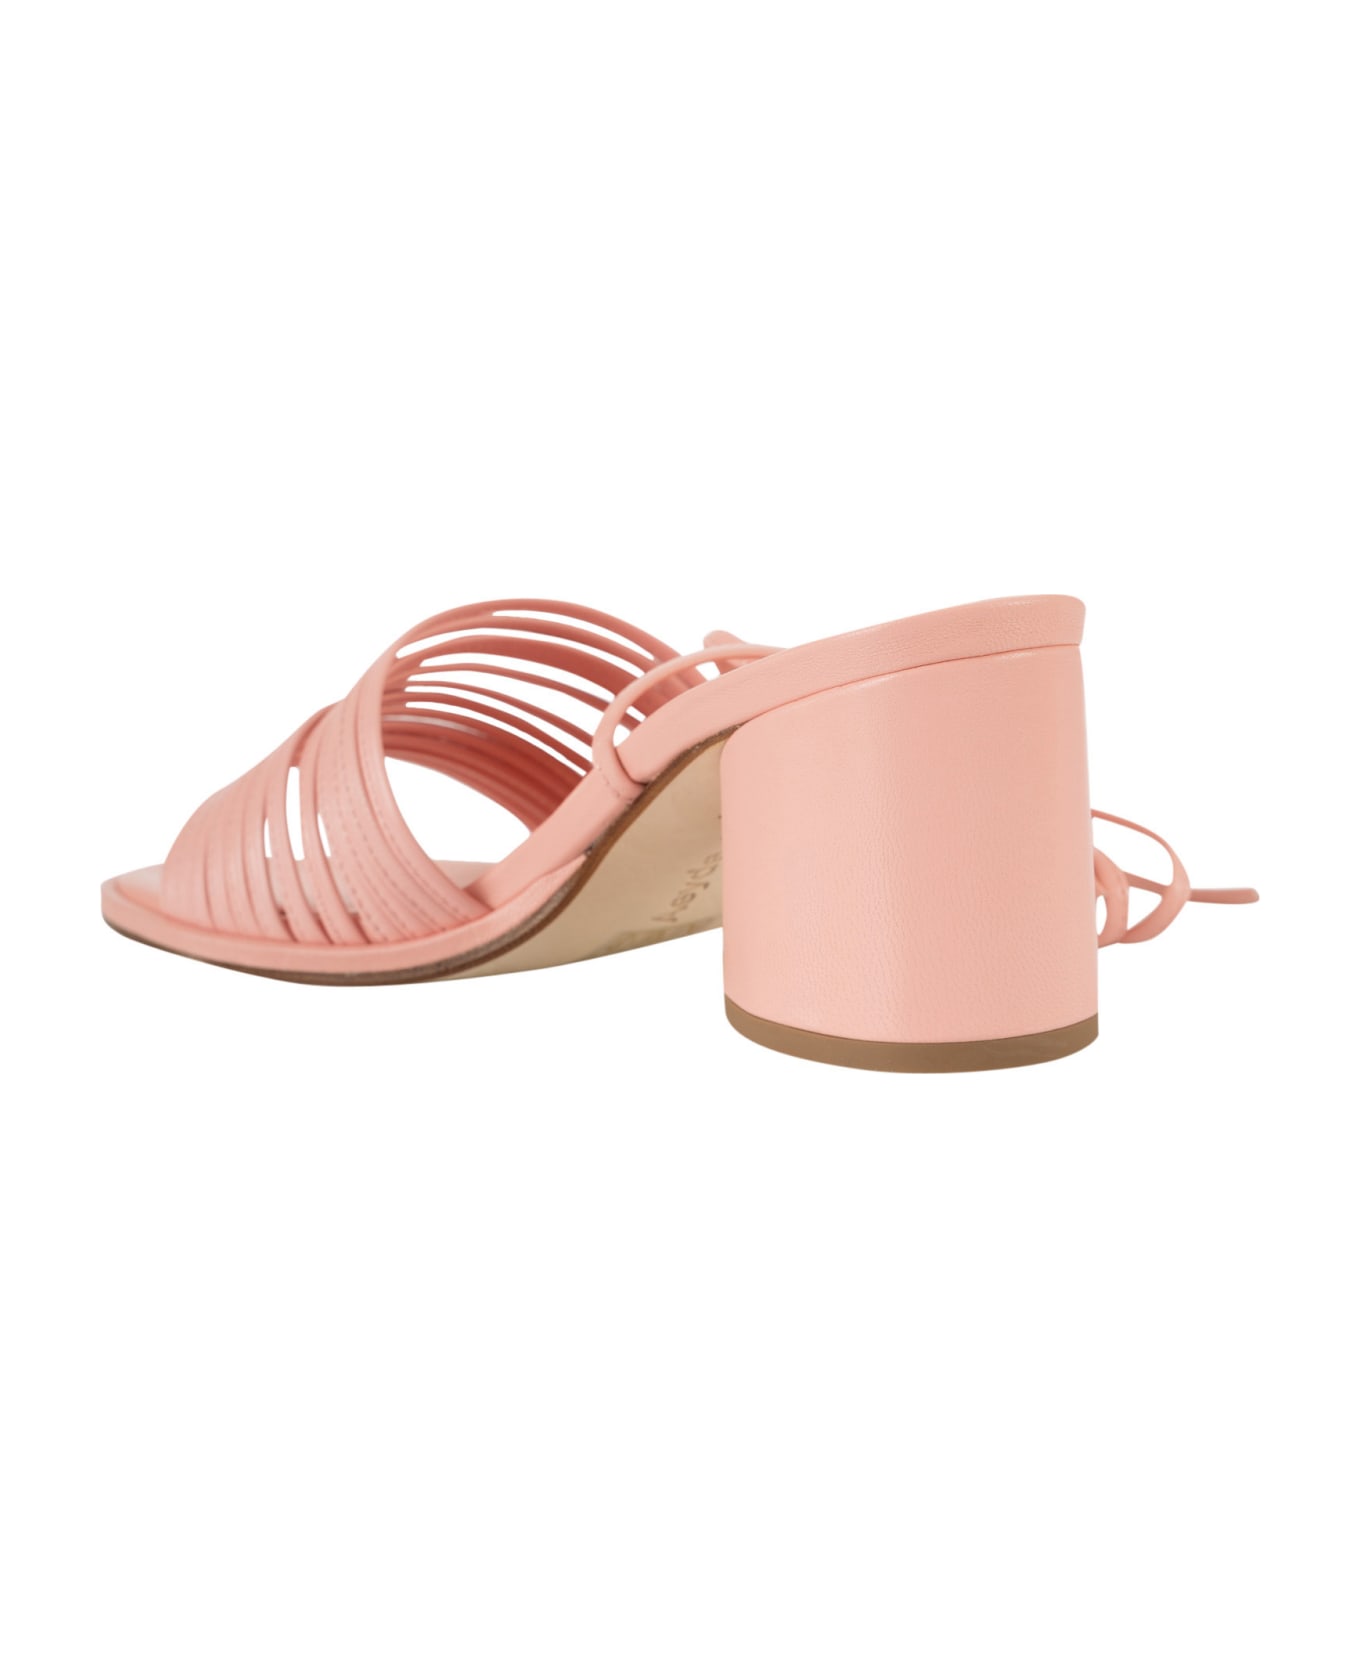 aeyde Natania Sandals - Pink